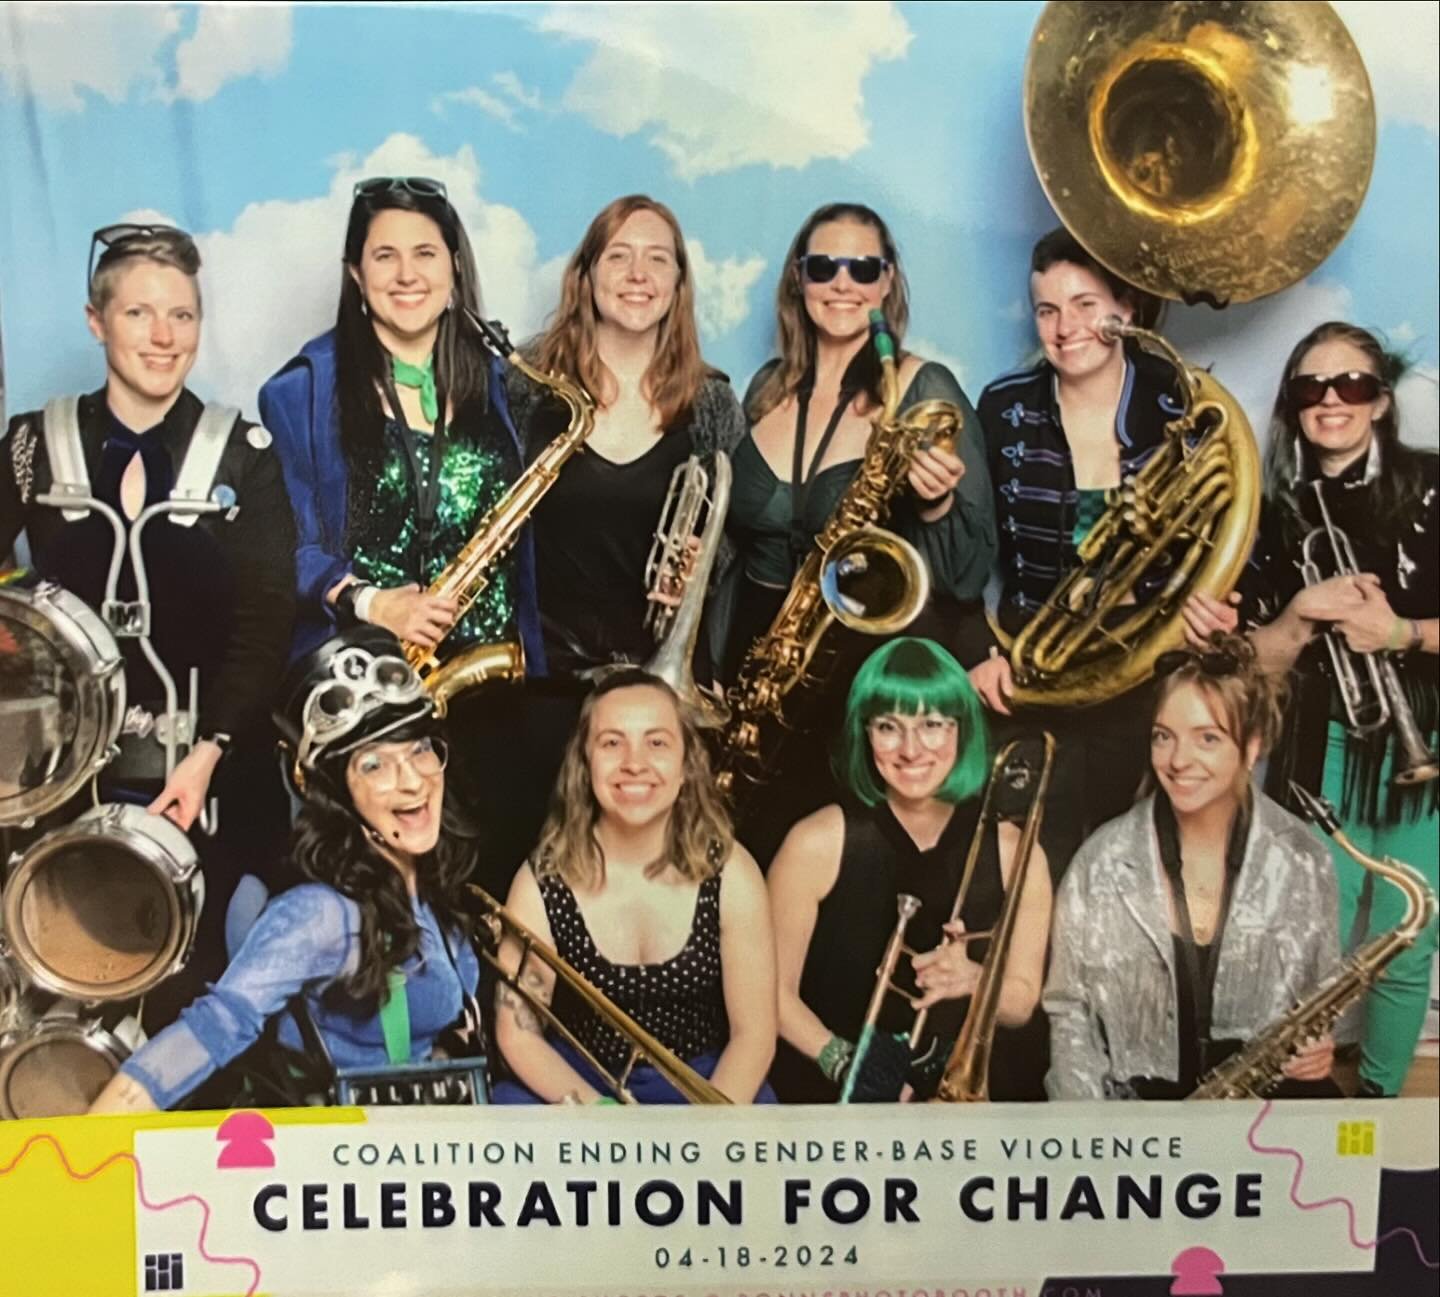 Nothing like dancing and roaring out some tunes for the Coalition Ending Gender Based Violence Celebration for Change event! This cause means so much to us and we were honored to be part of an event with incredible speakers, poets, artists, organizer